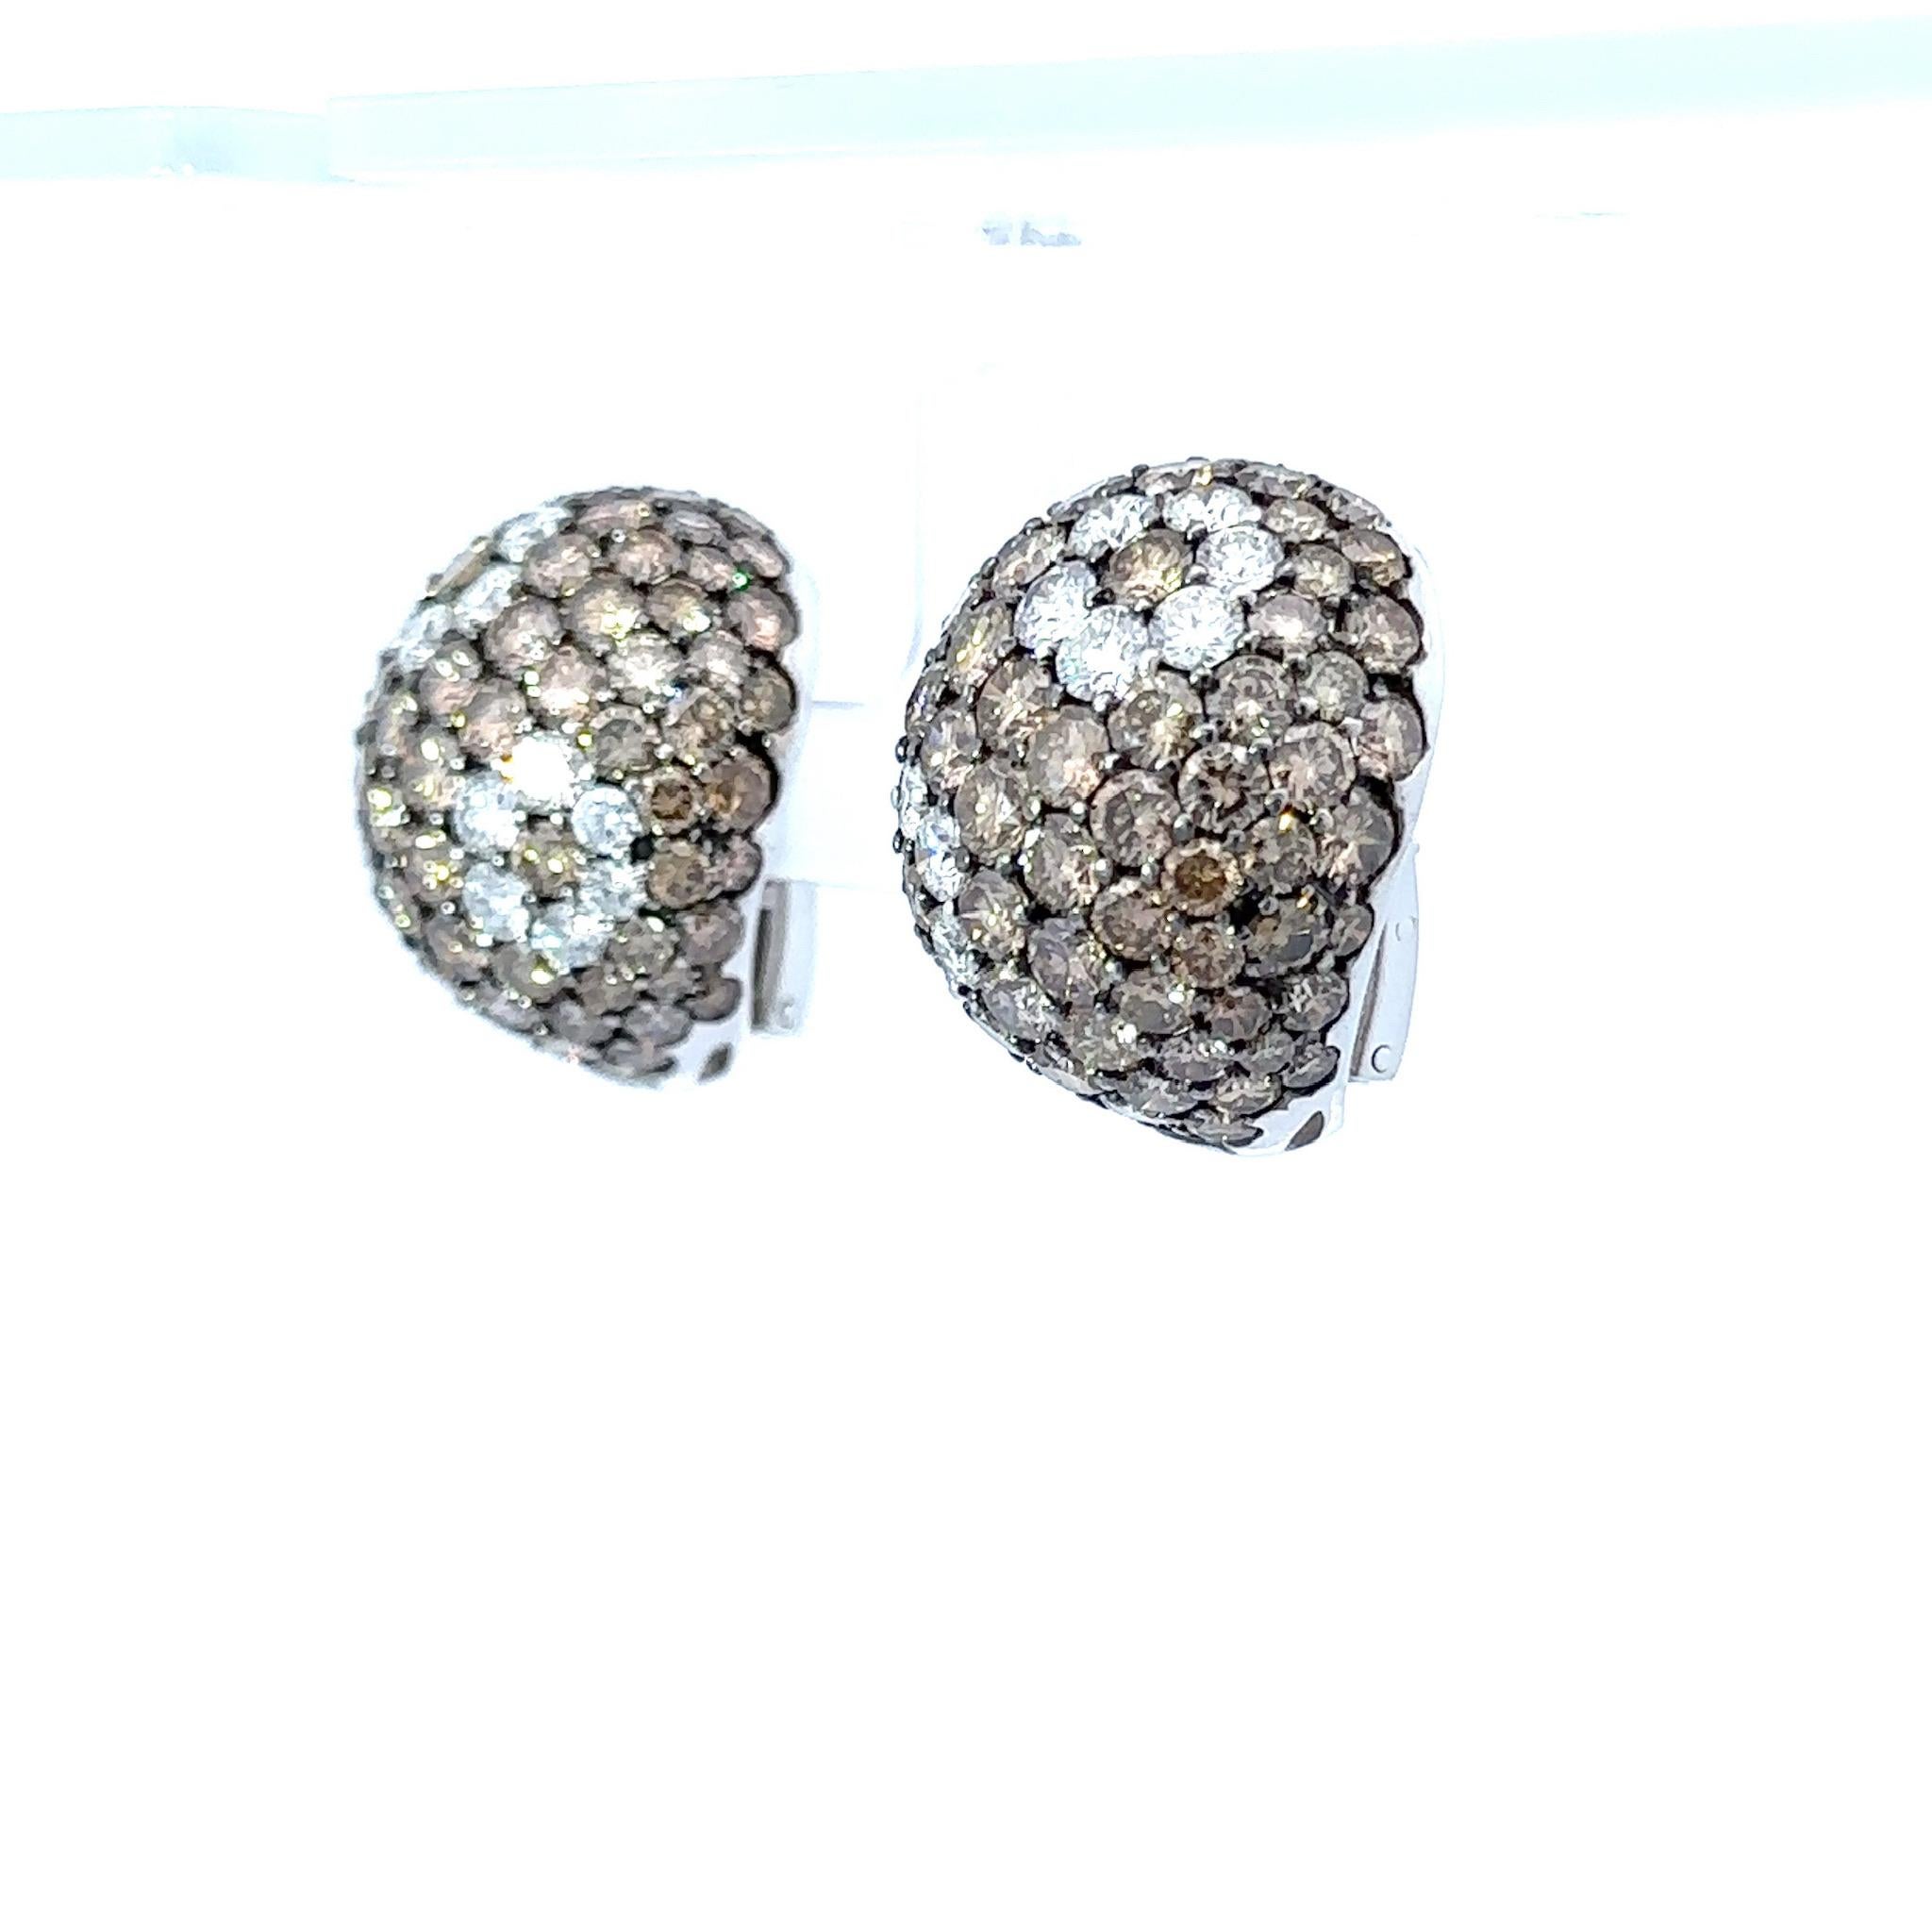 The 18k Italian white gold dome earrings with 28 carat brown and white diamonds are a truly exquisite and opulent piece of jewelry. Crafted with precision and artistry, these earrings showcase the perfect fusion of luxurious materials and